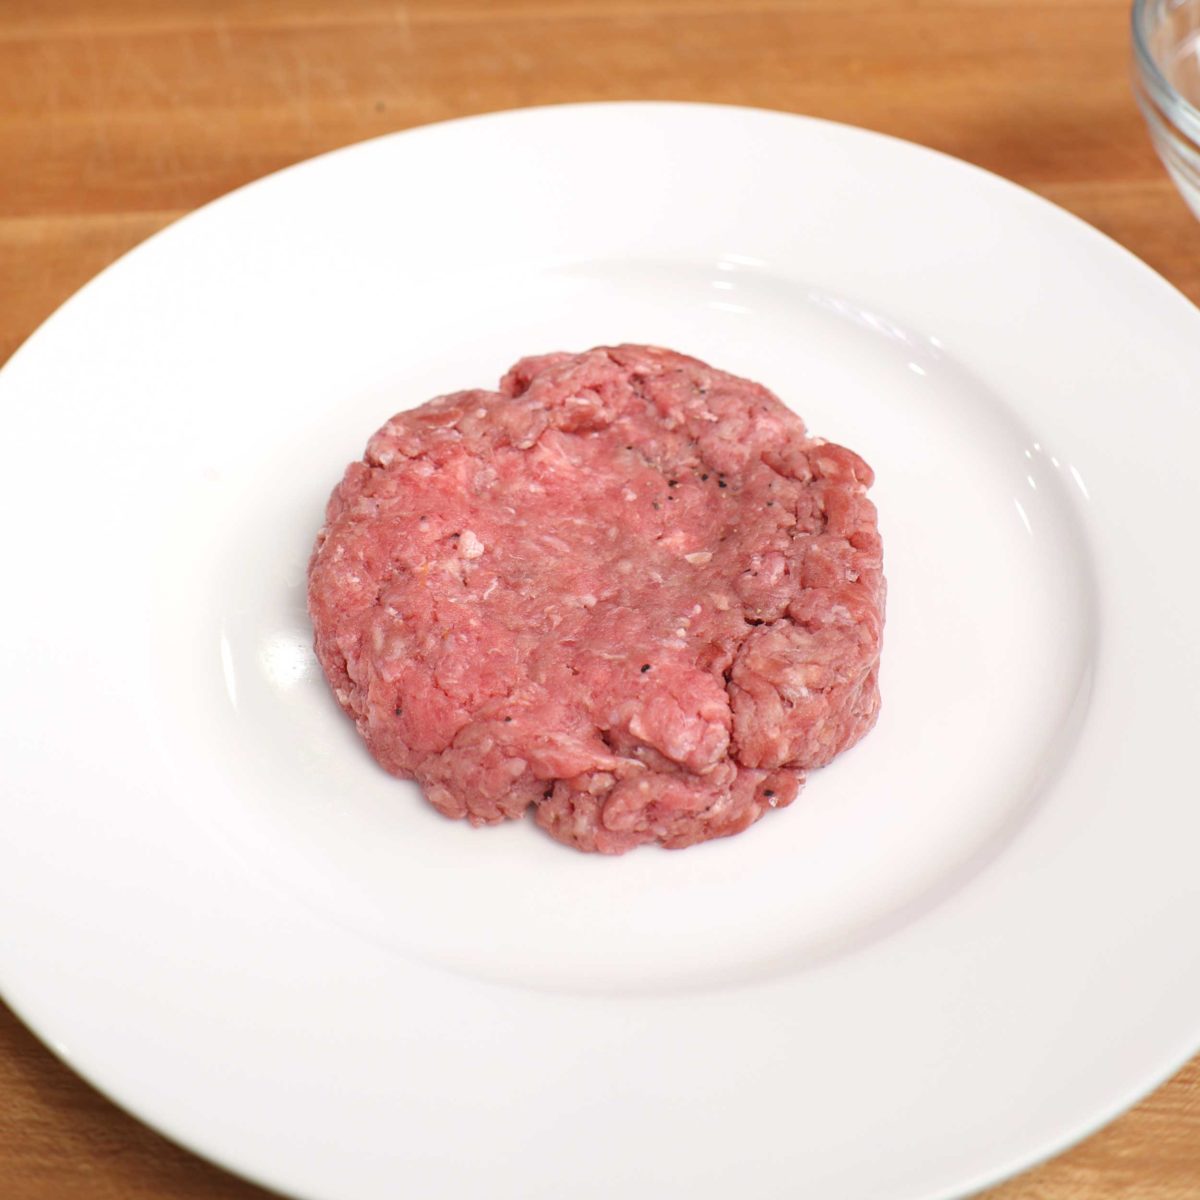 an uncooked hamburger patty on a white plate.